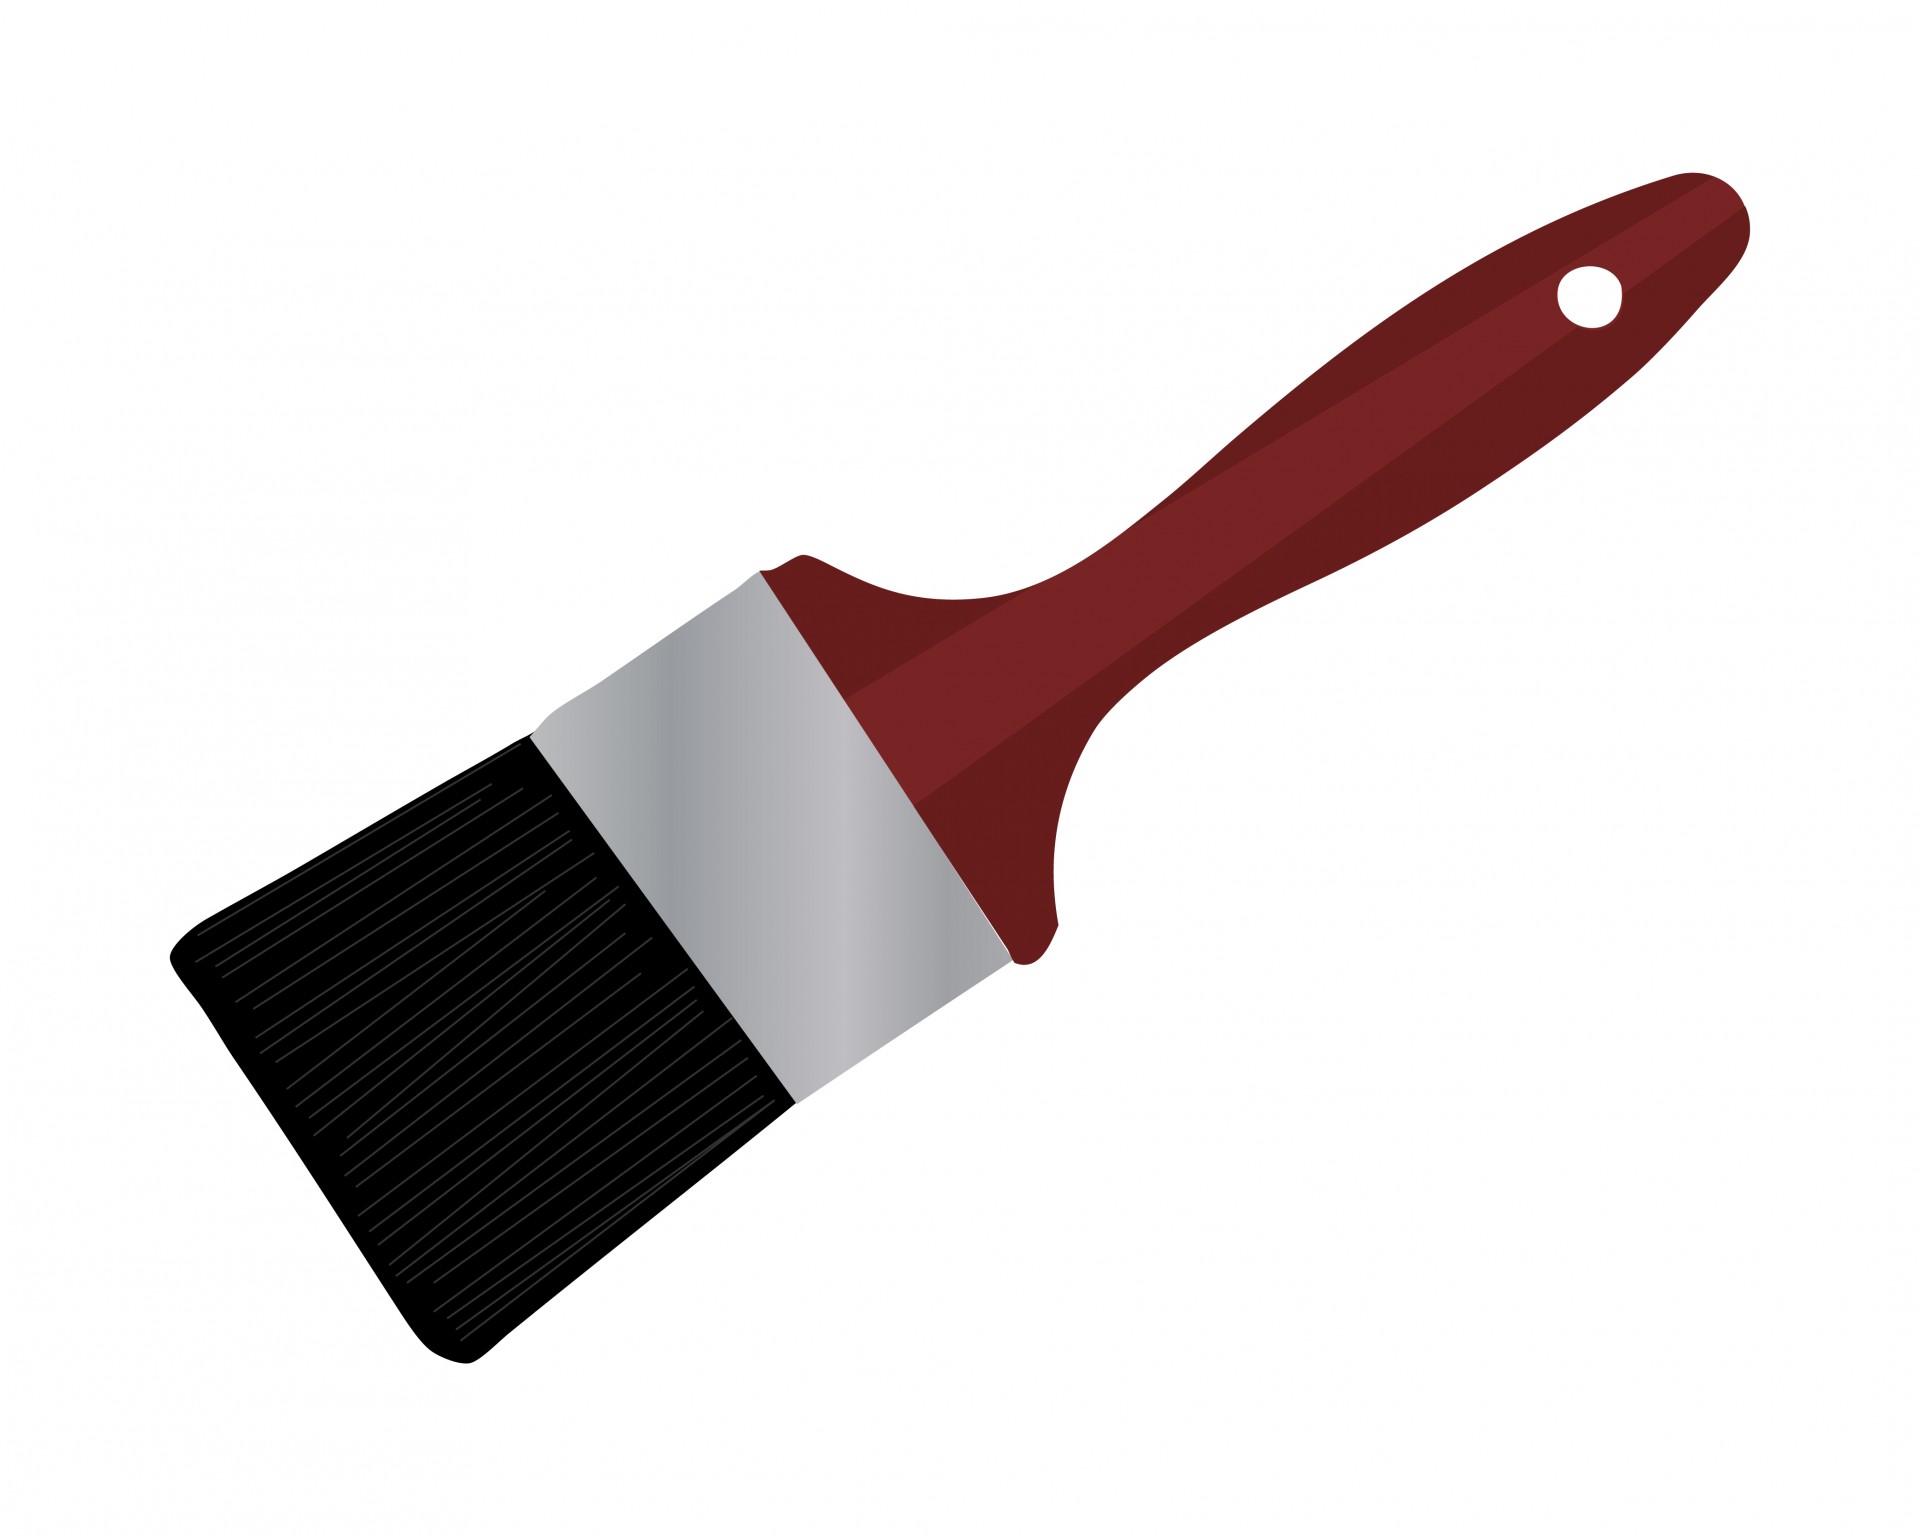 Free clip art Artist's Paintbrush by jlawrence